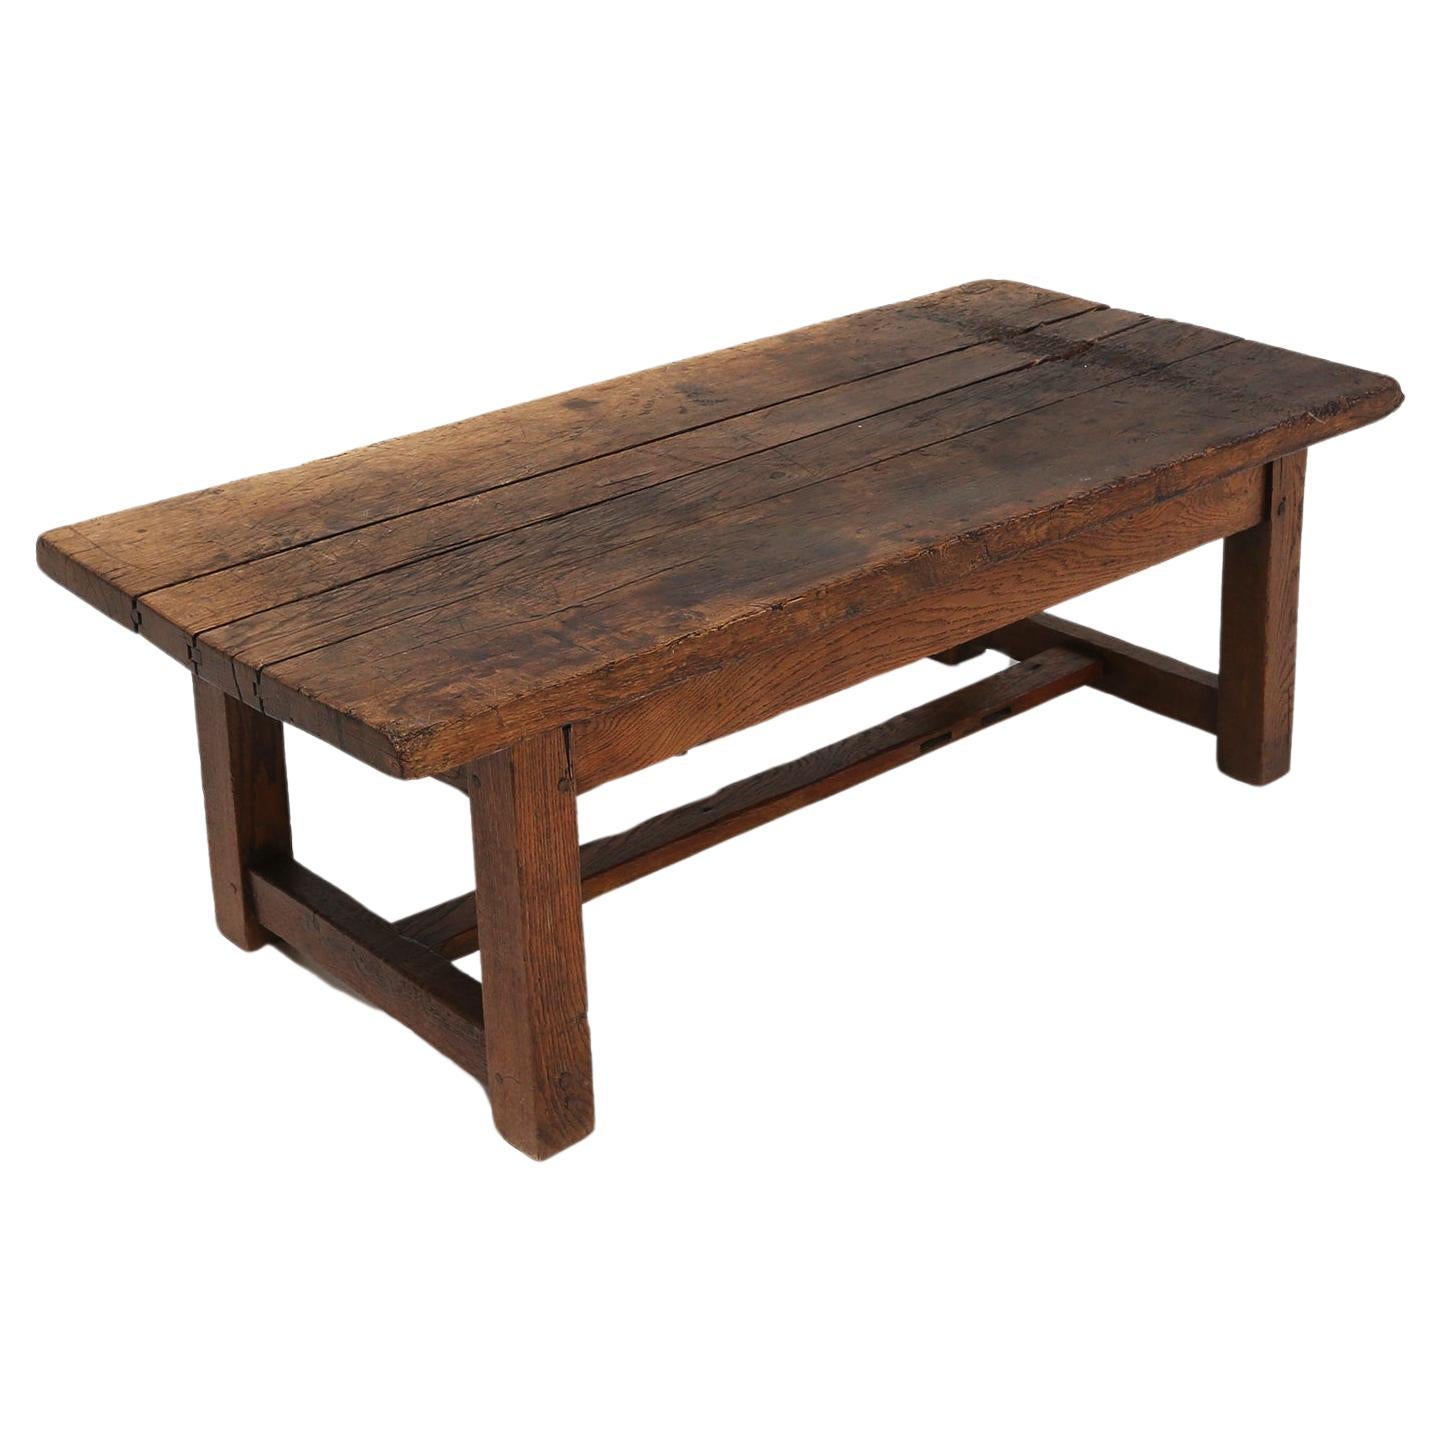 Rustic wooden coffee table 1890 For Sale